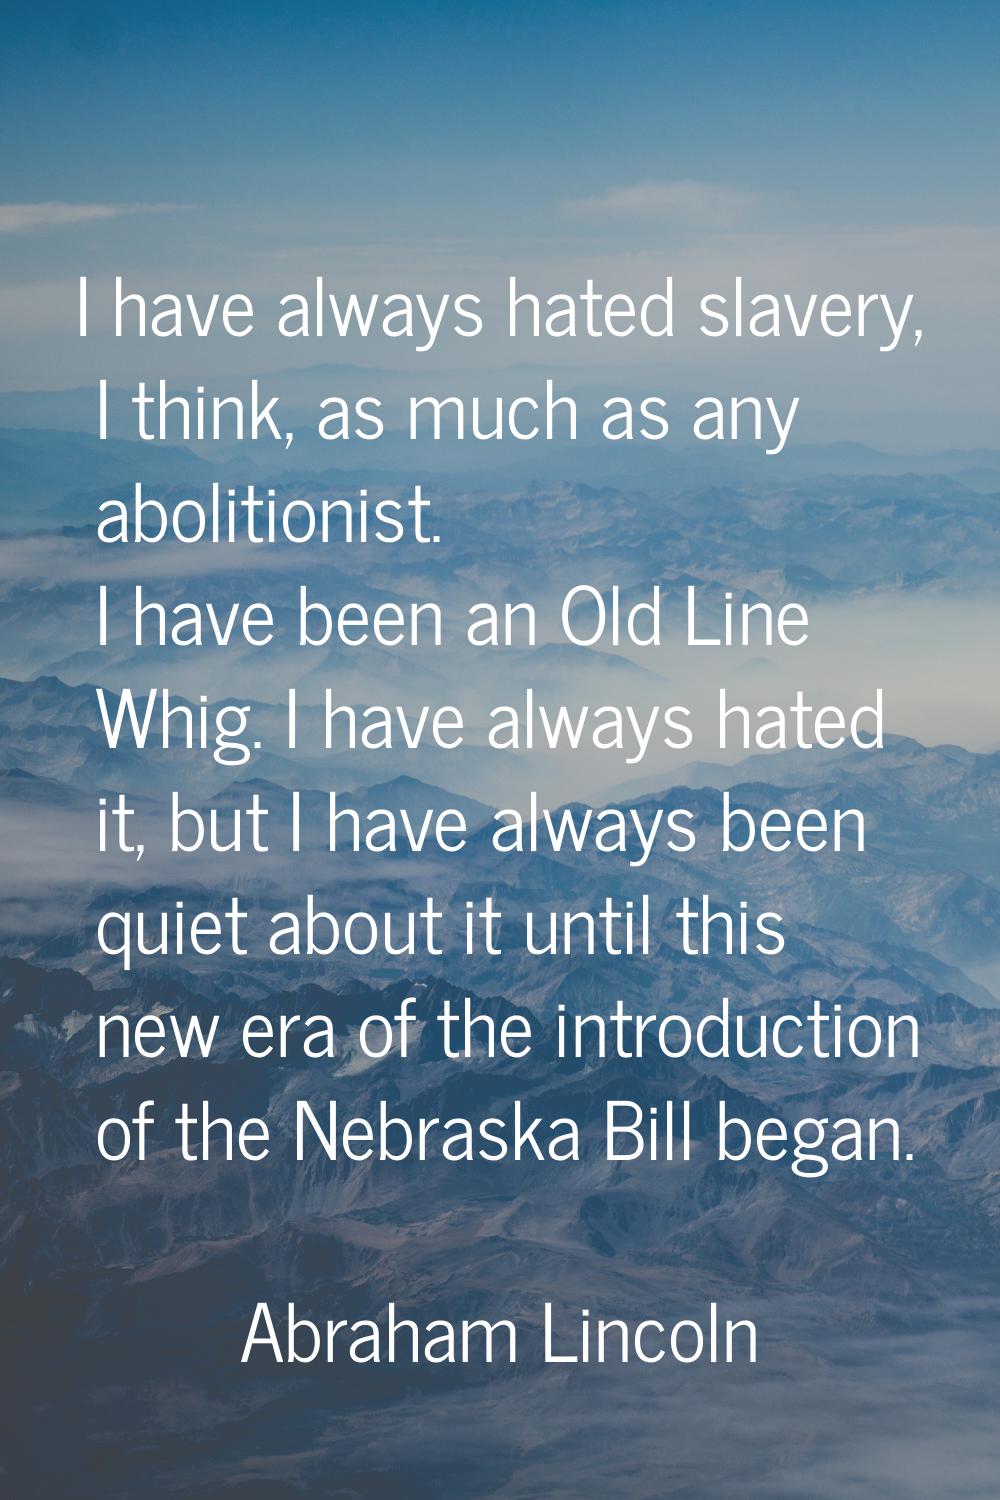 I have always hated slavery, I think, as much as any abolitionist. I have been an Old Line Whig. I 